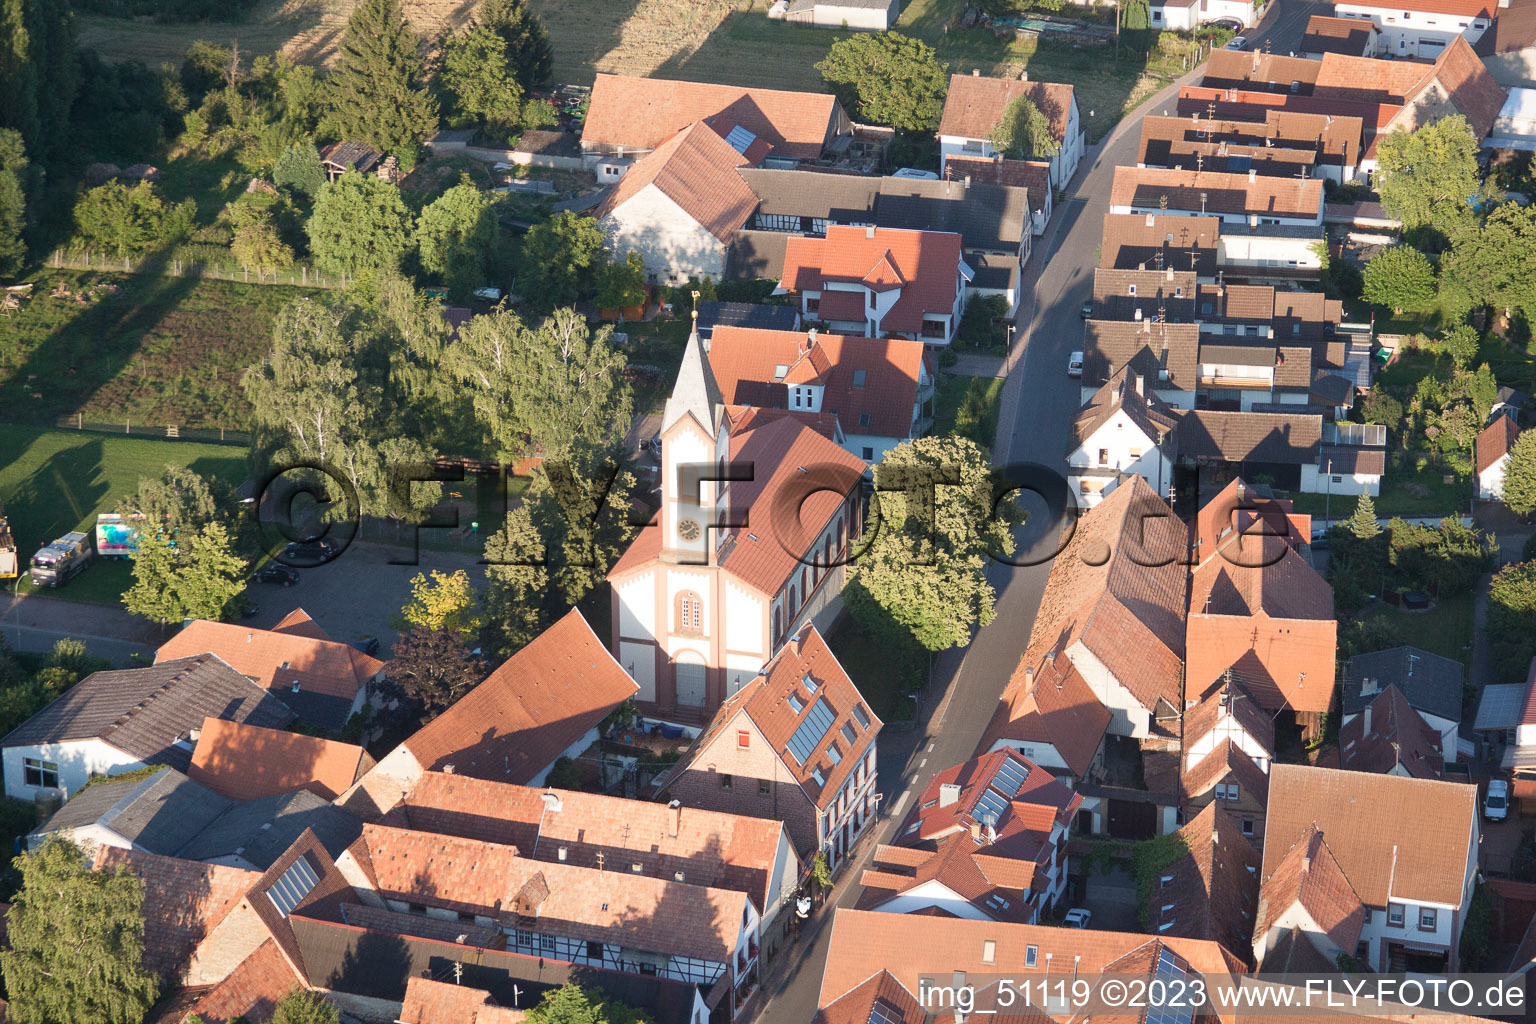 District Mühlhofen in Billigheim-Ingenheim in the state Rhineland-Palatinate, Germany from the drone perspective